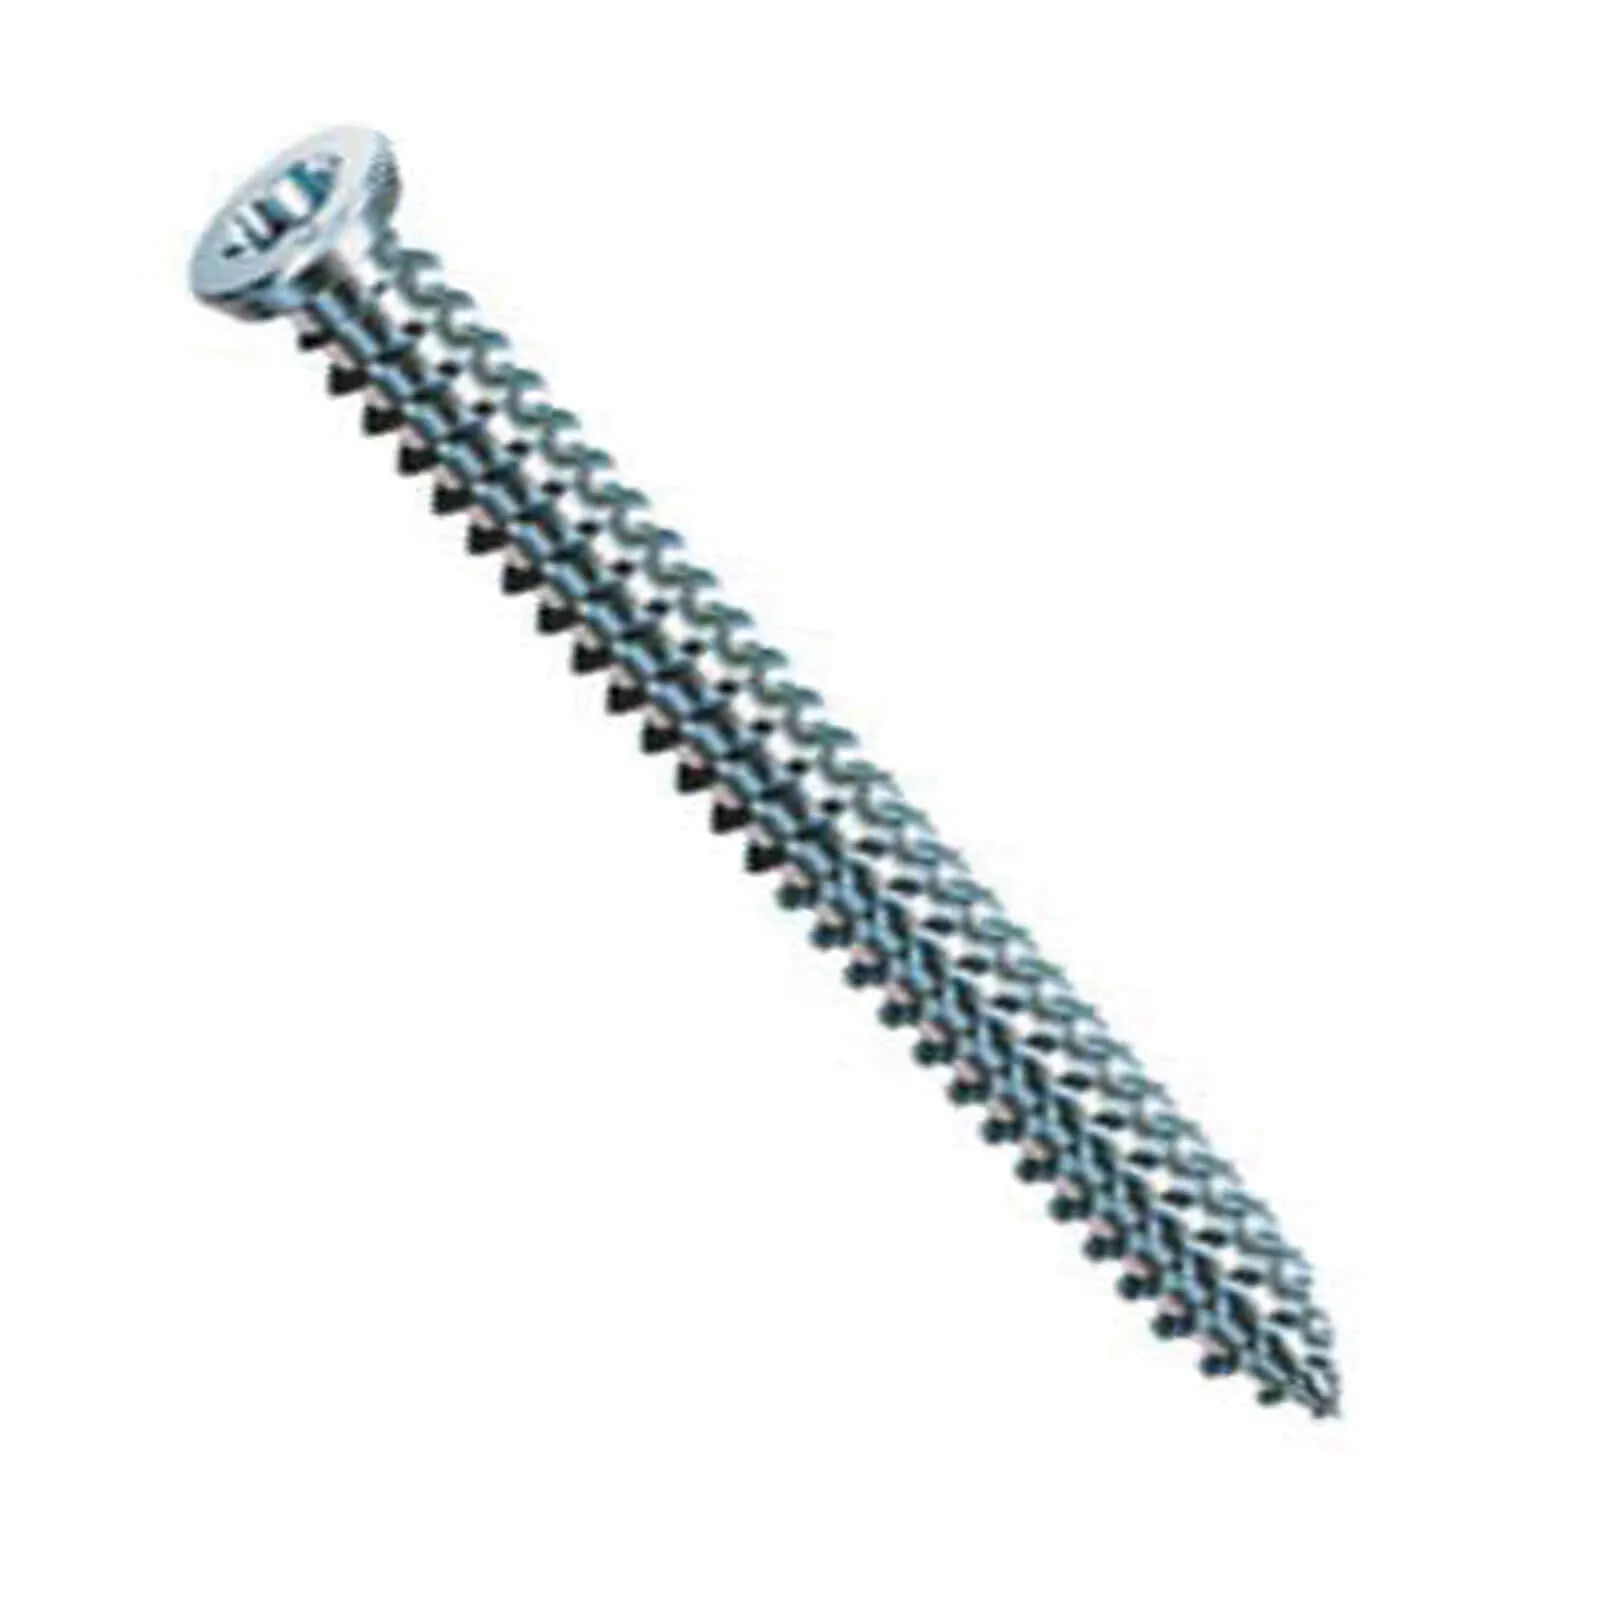 Spax RA Countersunk Torx Frame Anchor Screws - 7.5mm, 120mm, Pack of 100